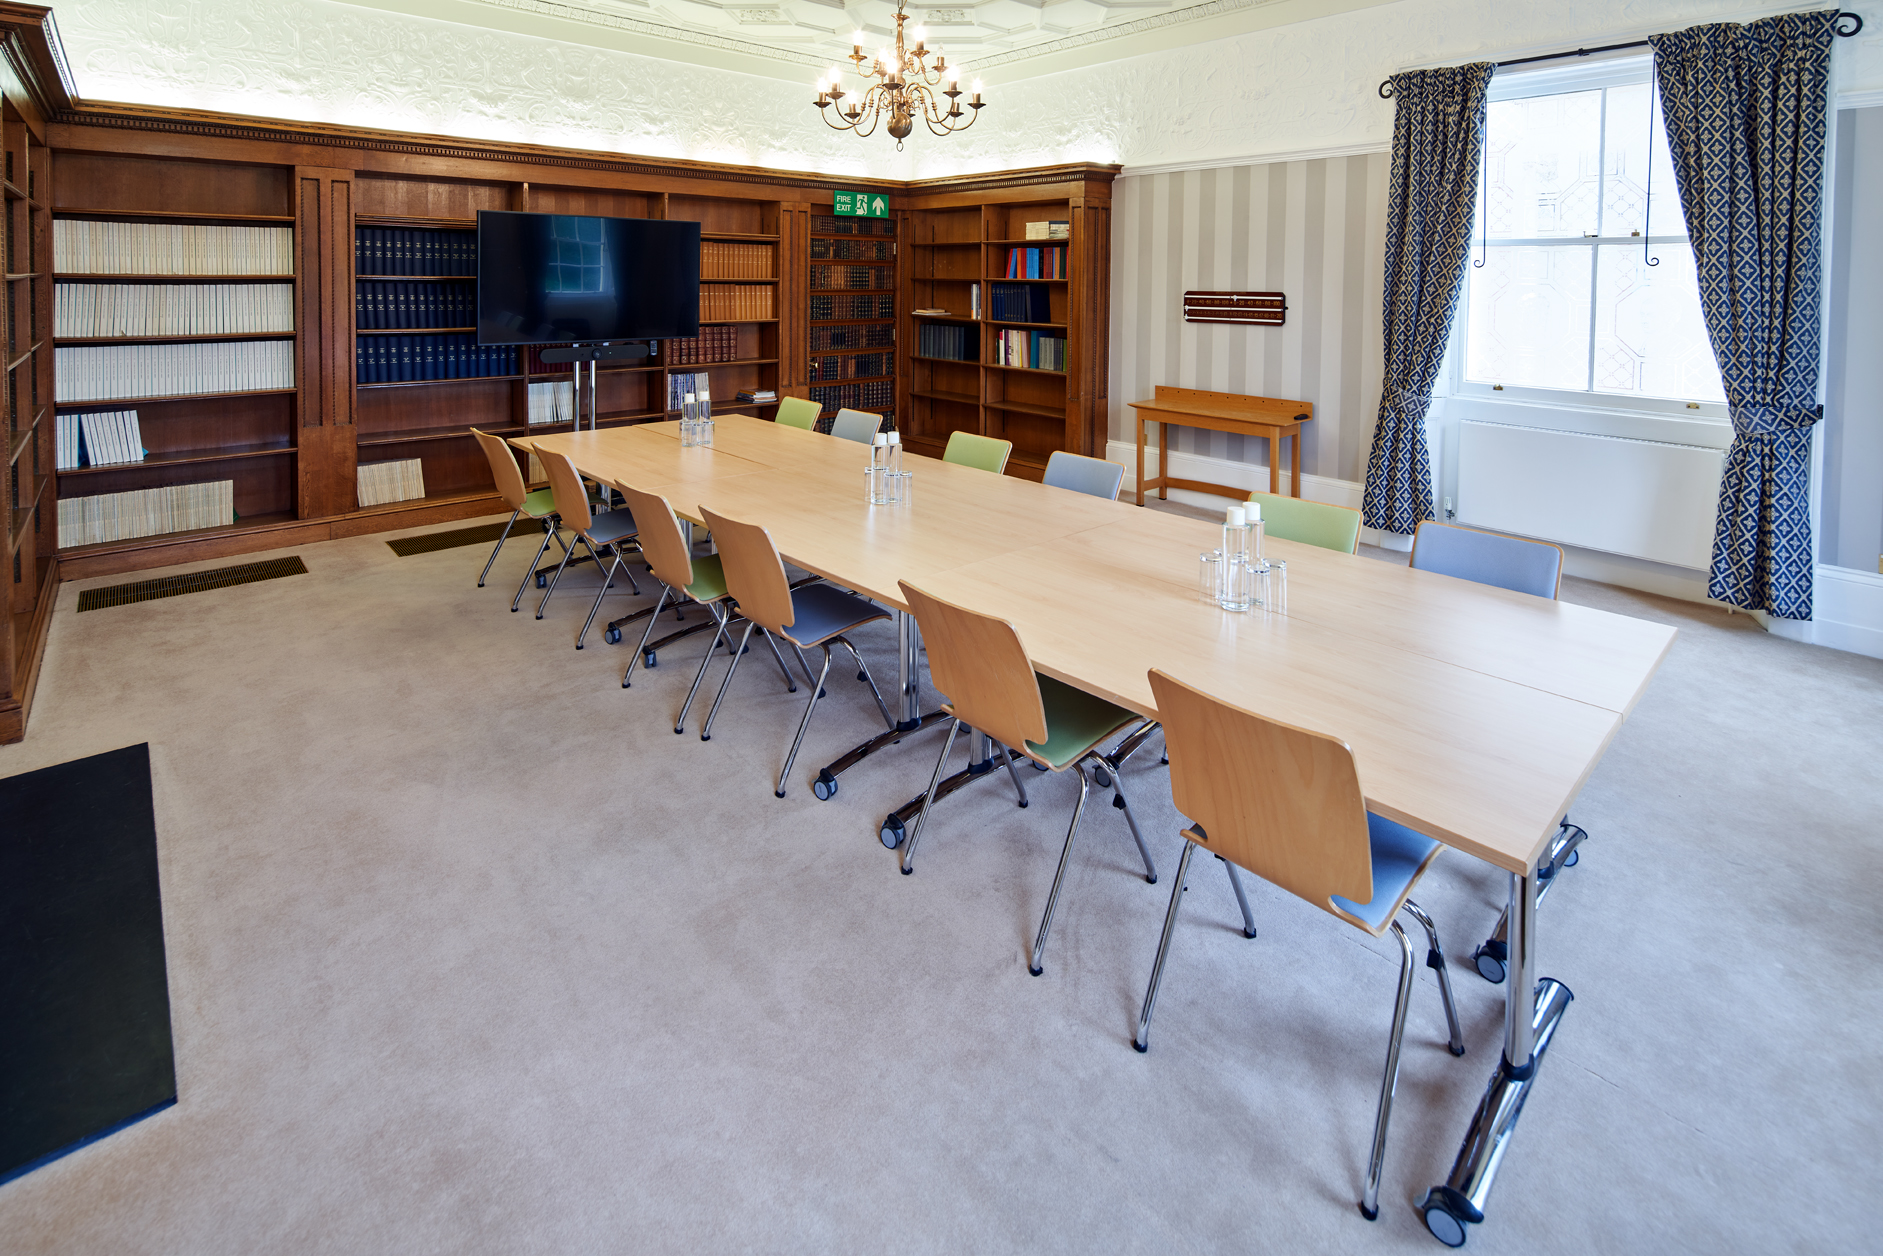 Library set up in boardroom layout